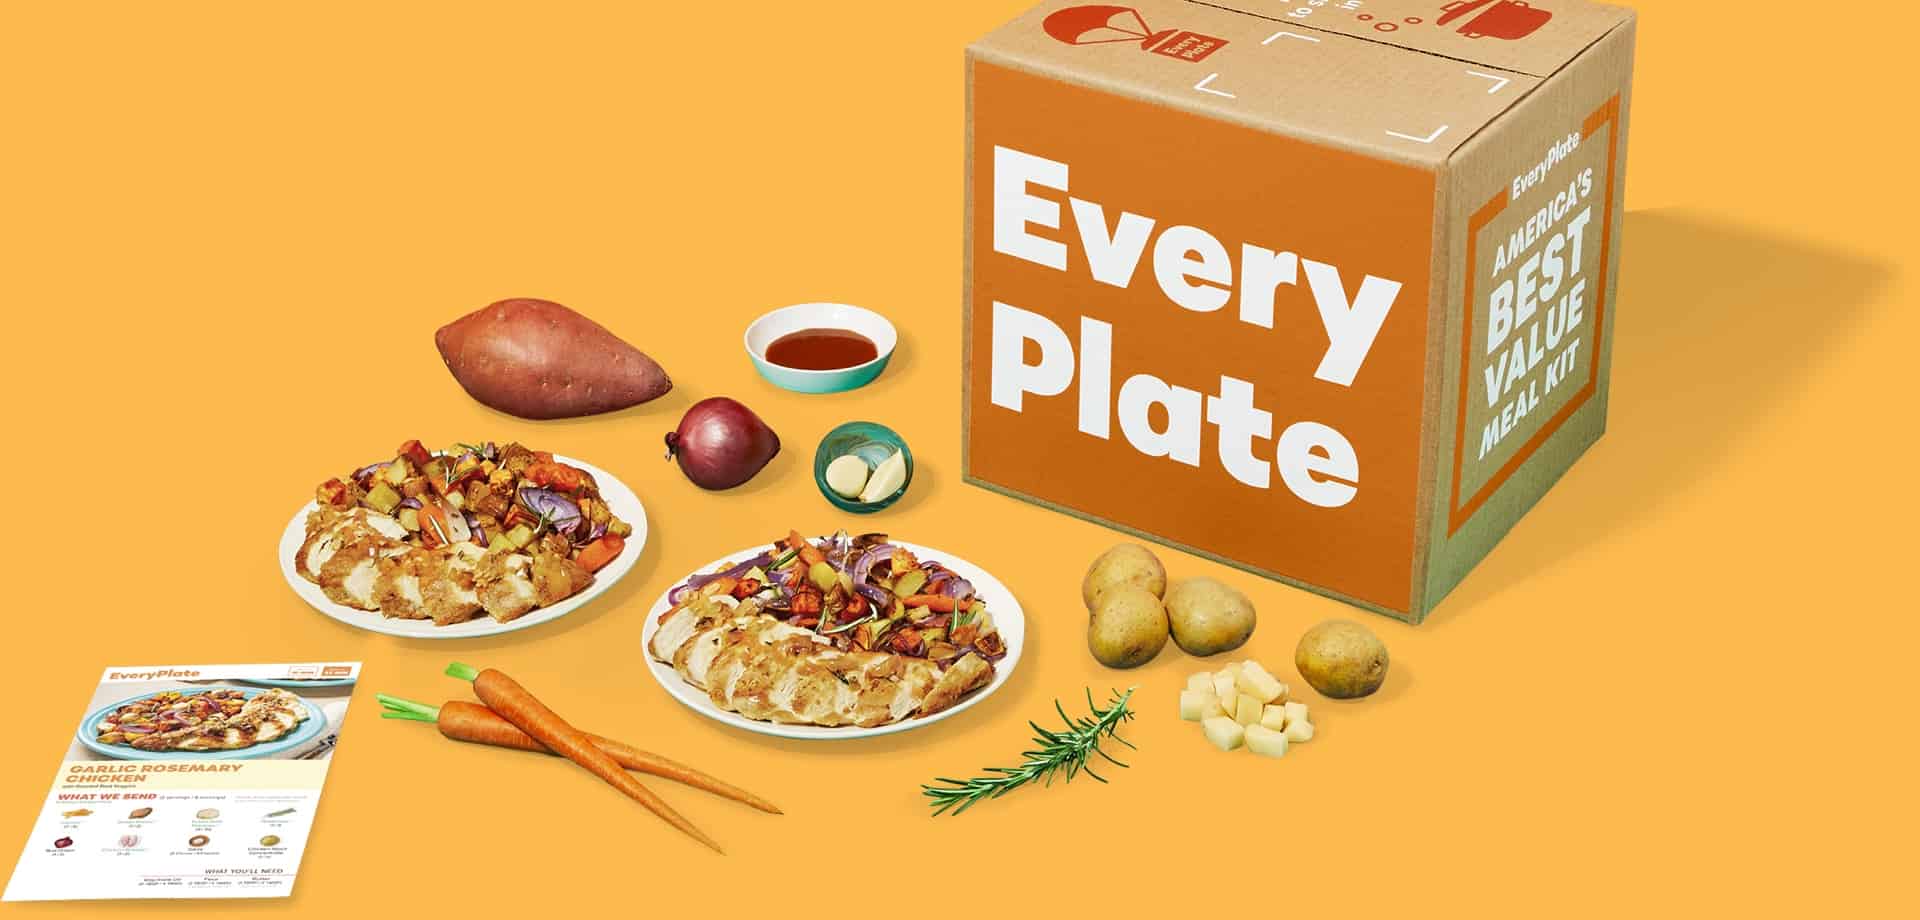 EveryPlate Cheap Meal Kit